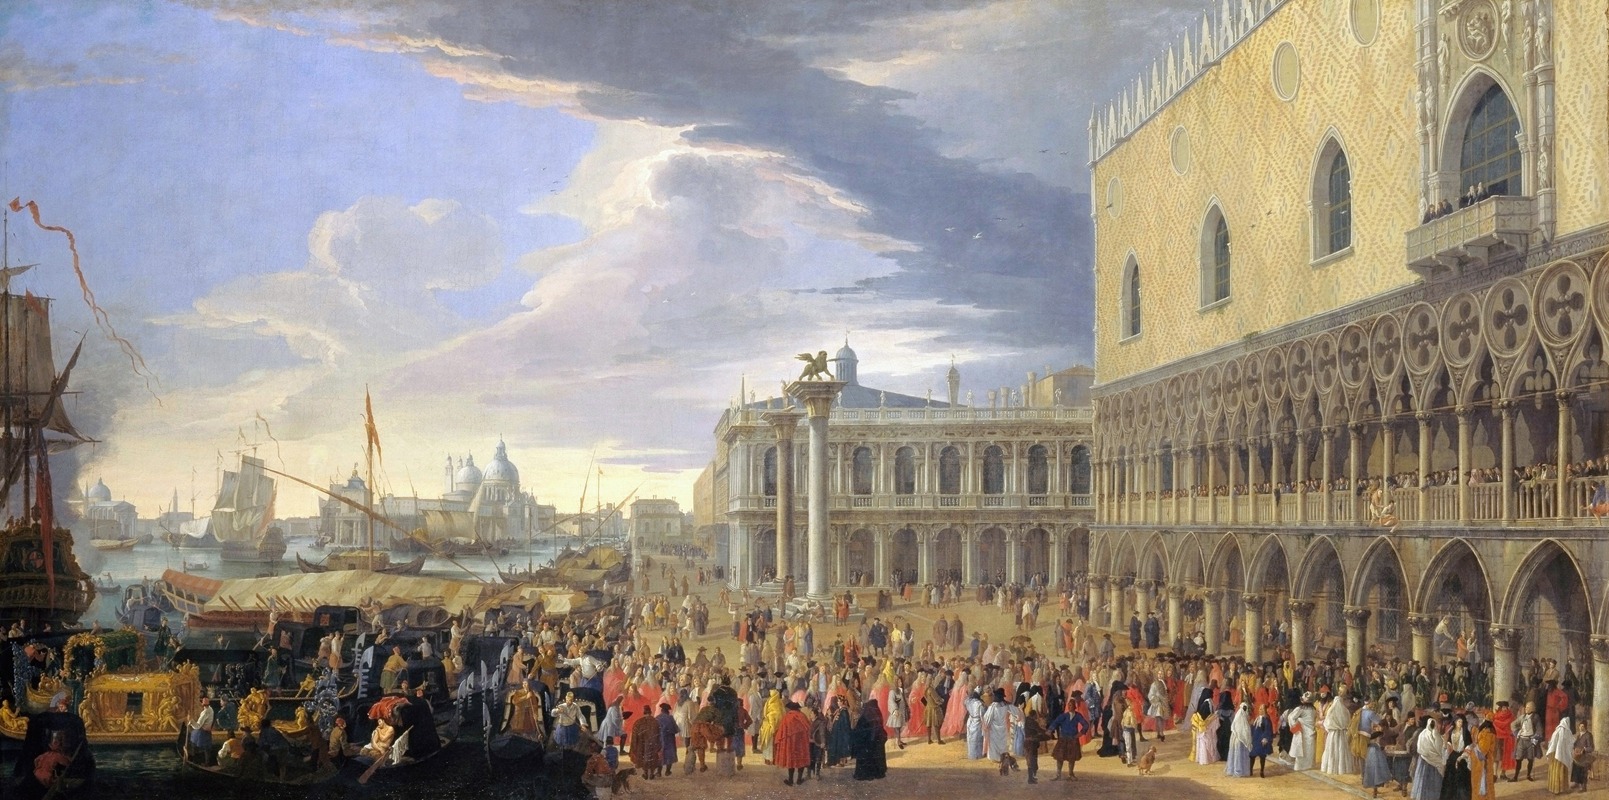 Luca Carlevarijs - The Arrival Of The Earl Of Manchester In Venice